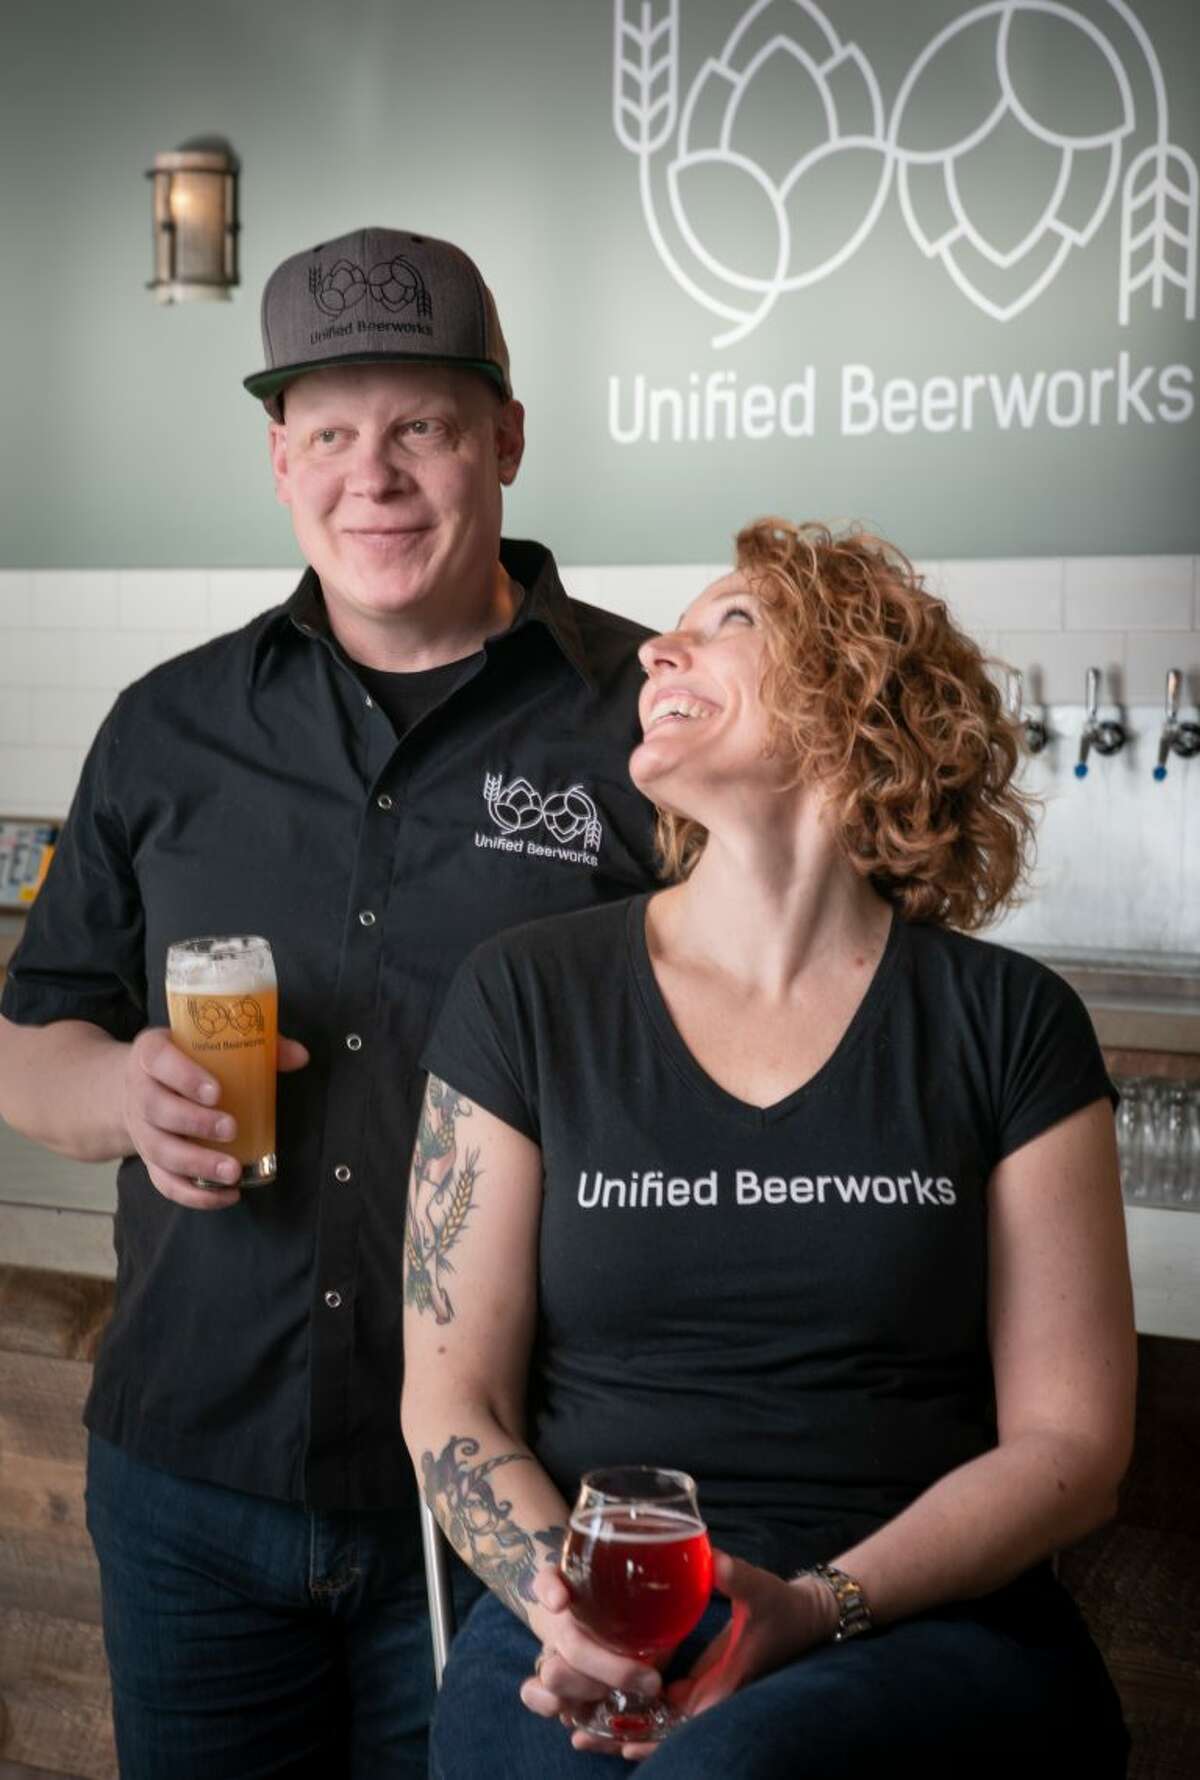 Unified Beerworks in Malta was founded in 2018 by the husband-and-wife team of Jeff Mannion and Erika Anderson, who are also its head brewers.